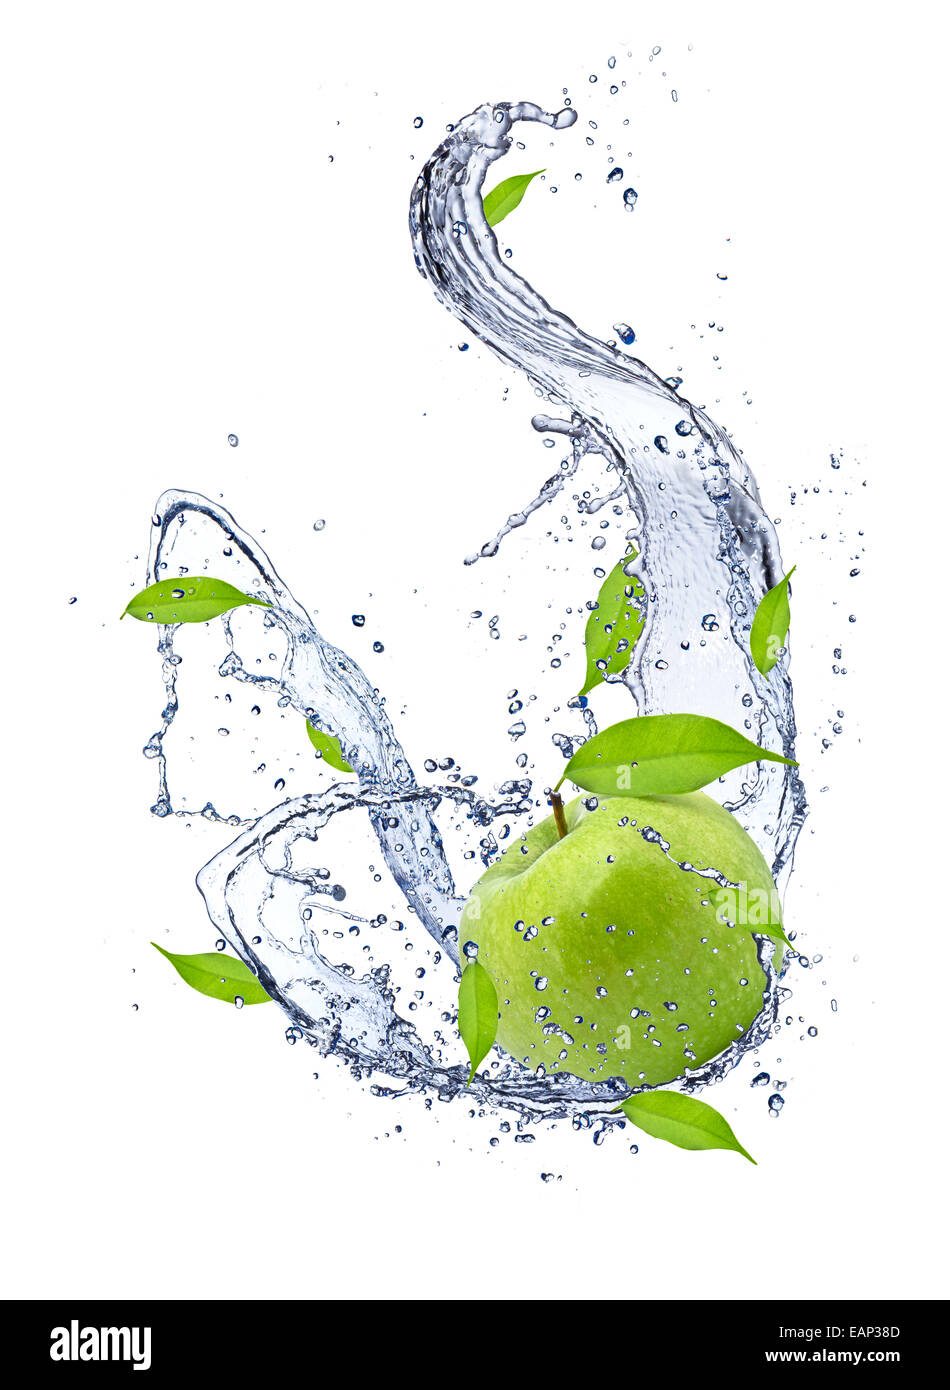 Green apple in water splash, isolated on white background Stock Photo